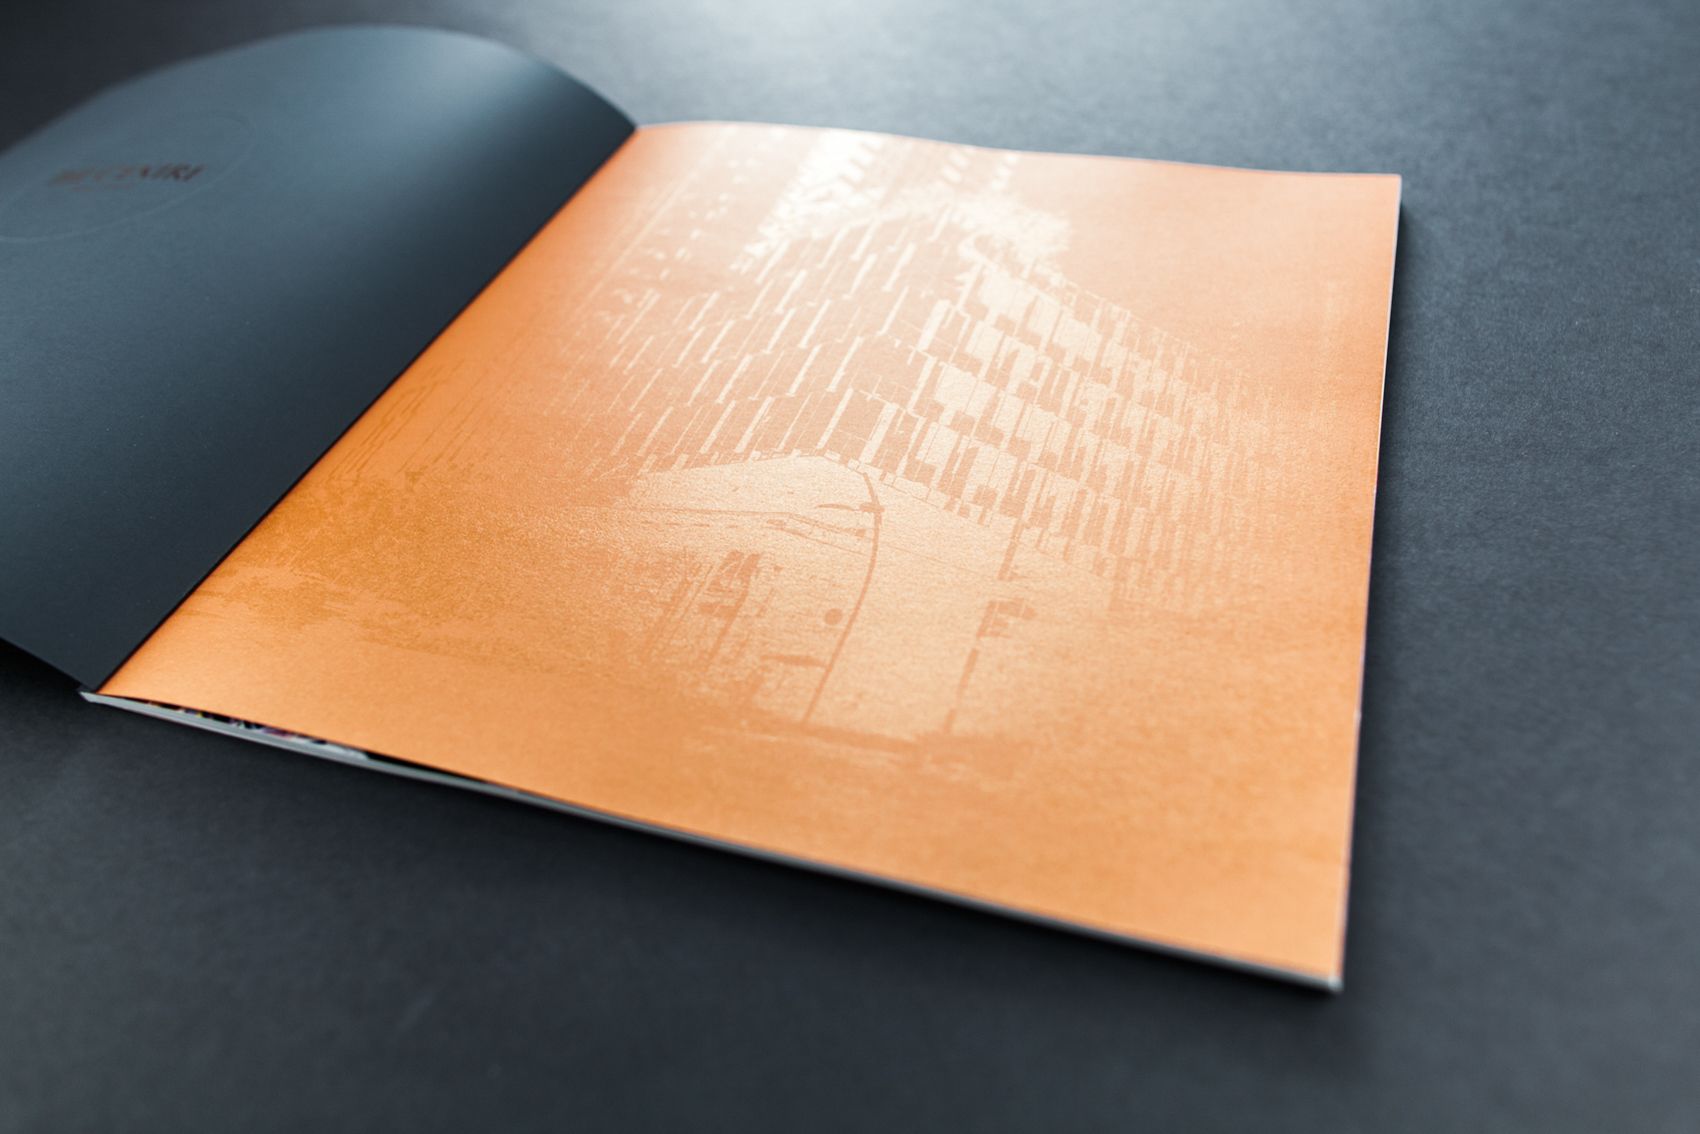 Orange front cover of the Centre brochure